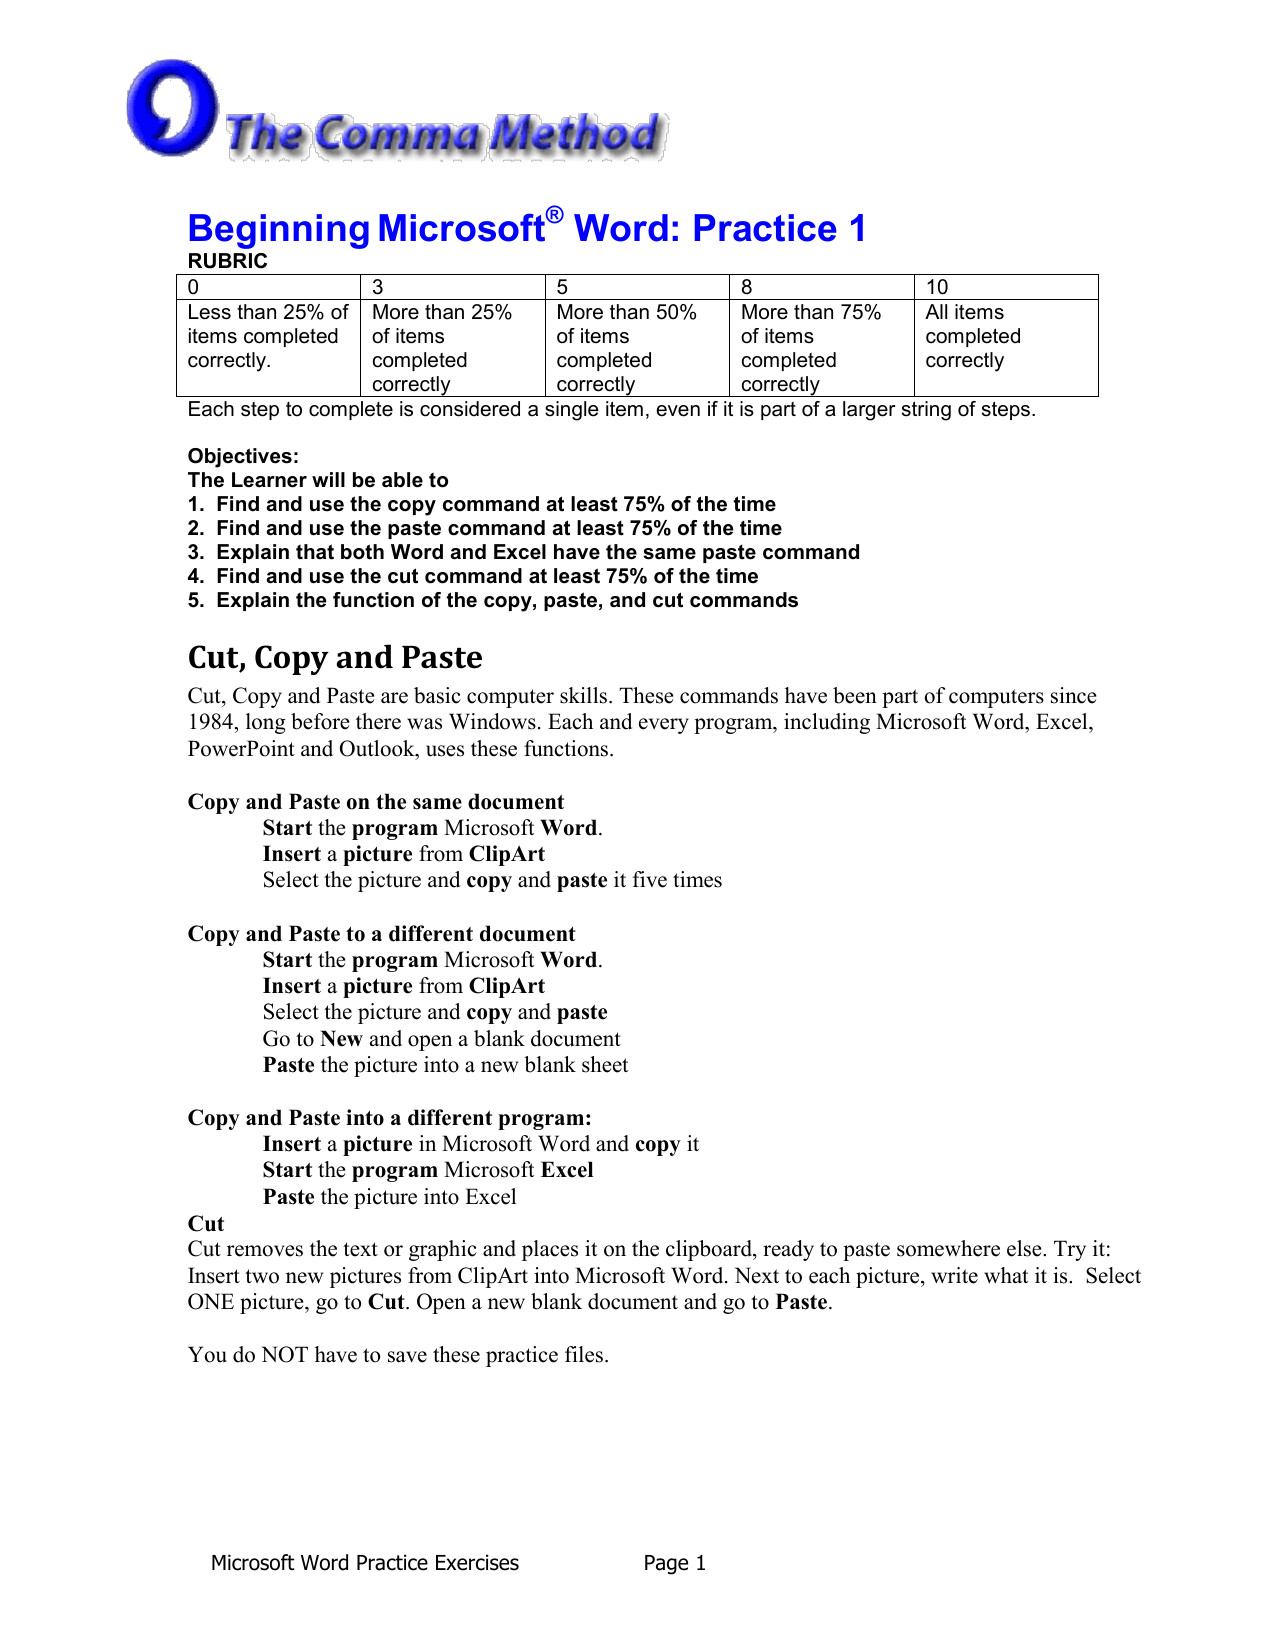 microsoft word basic assignments